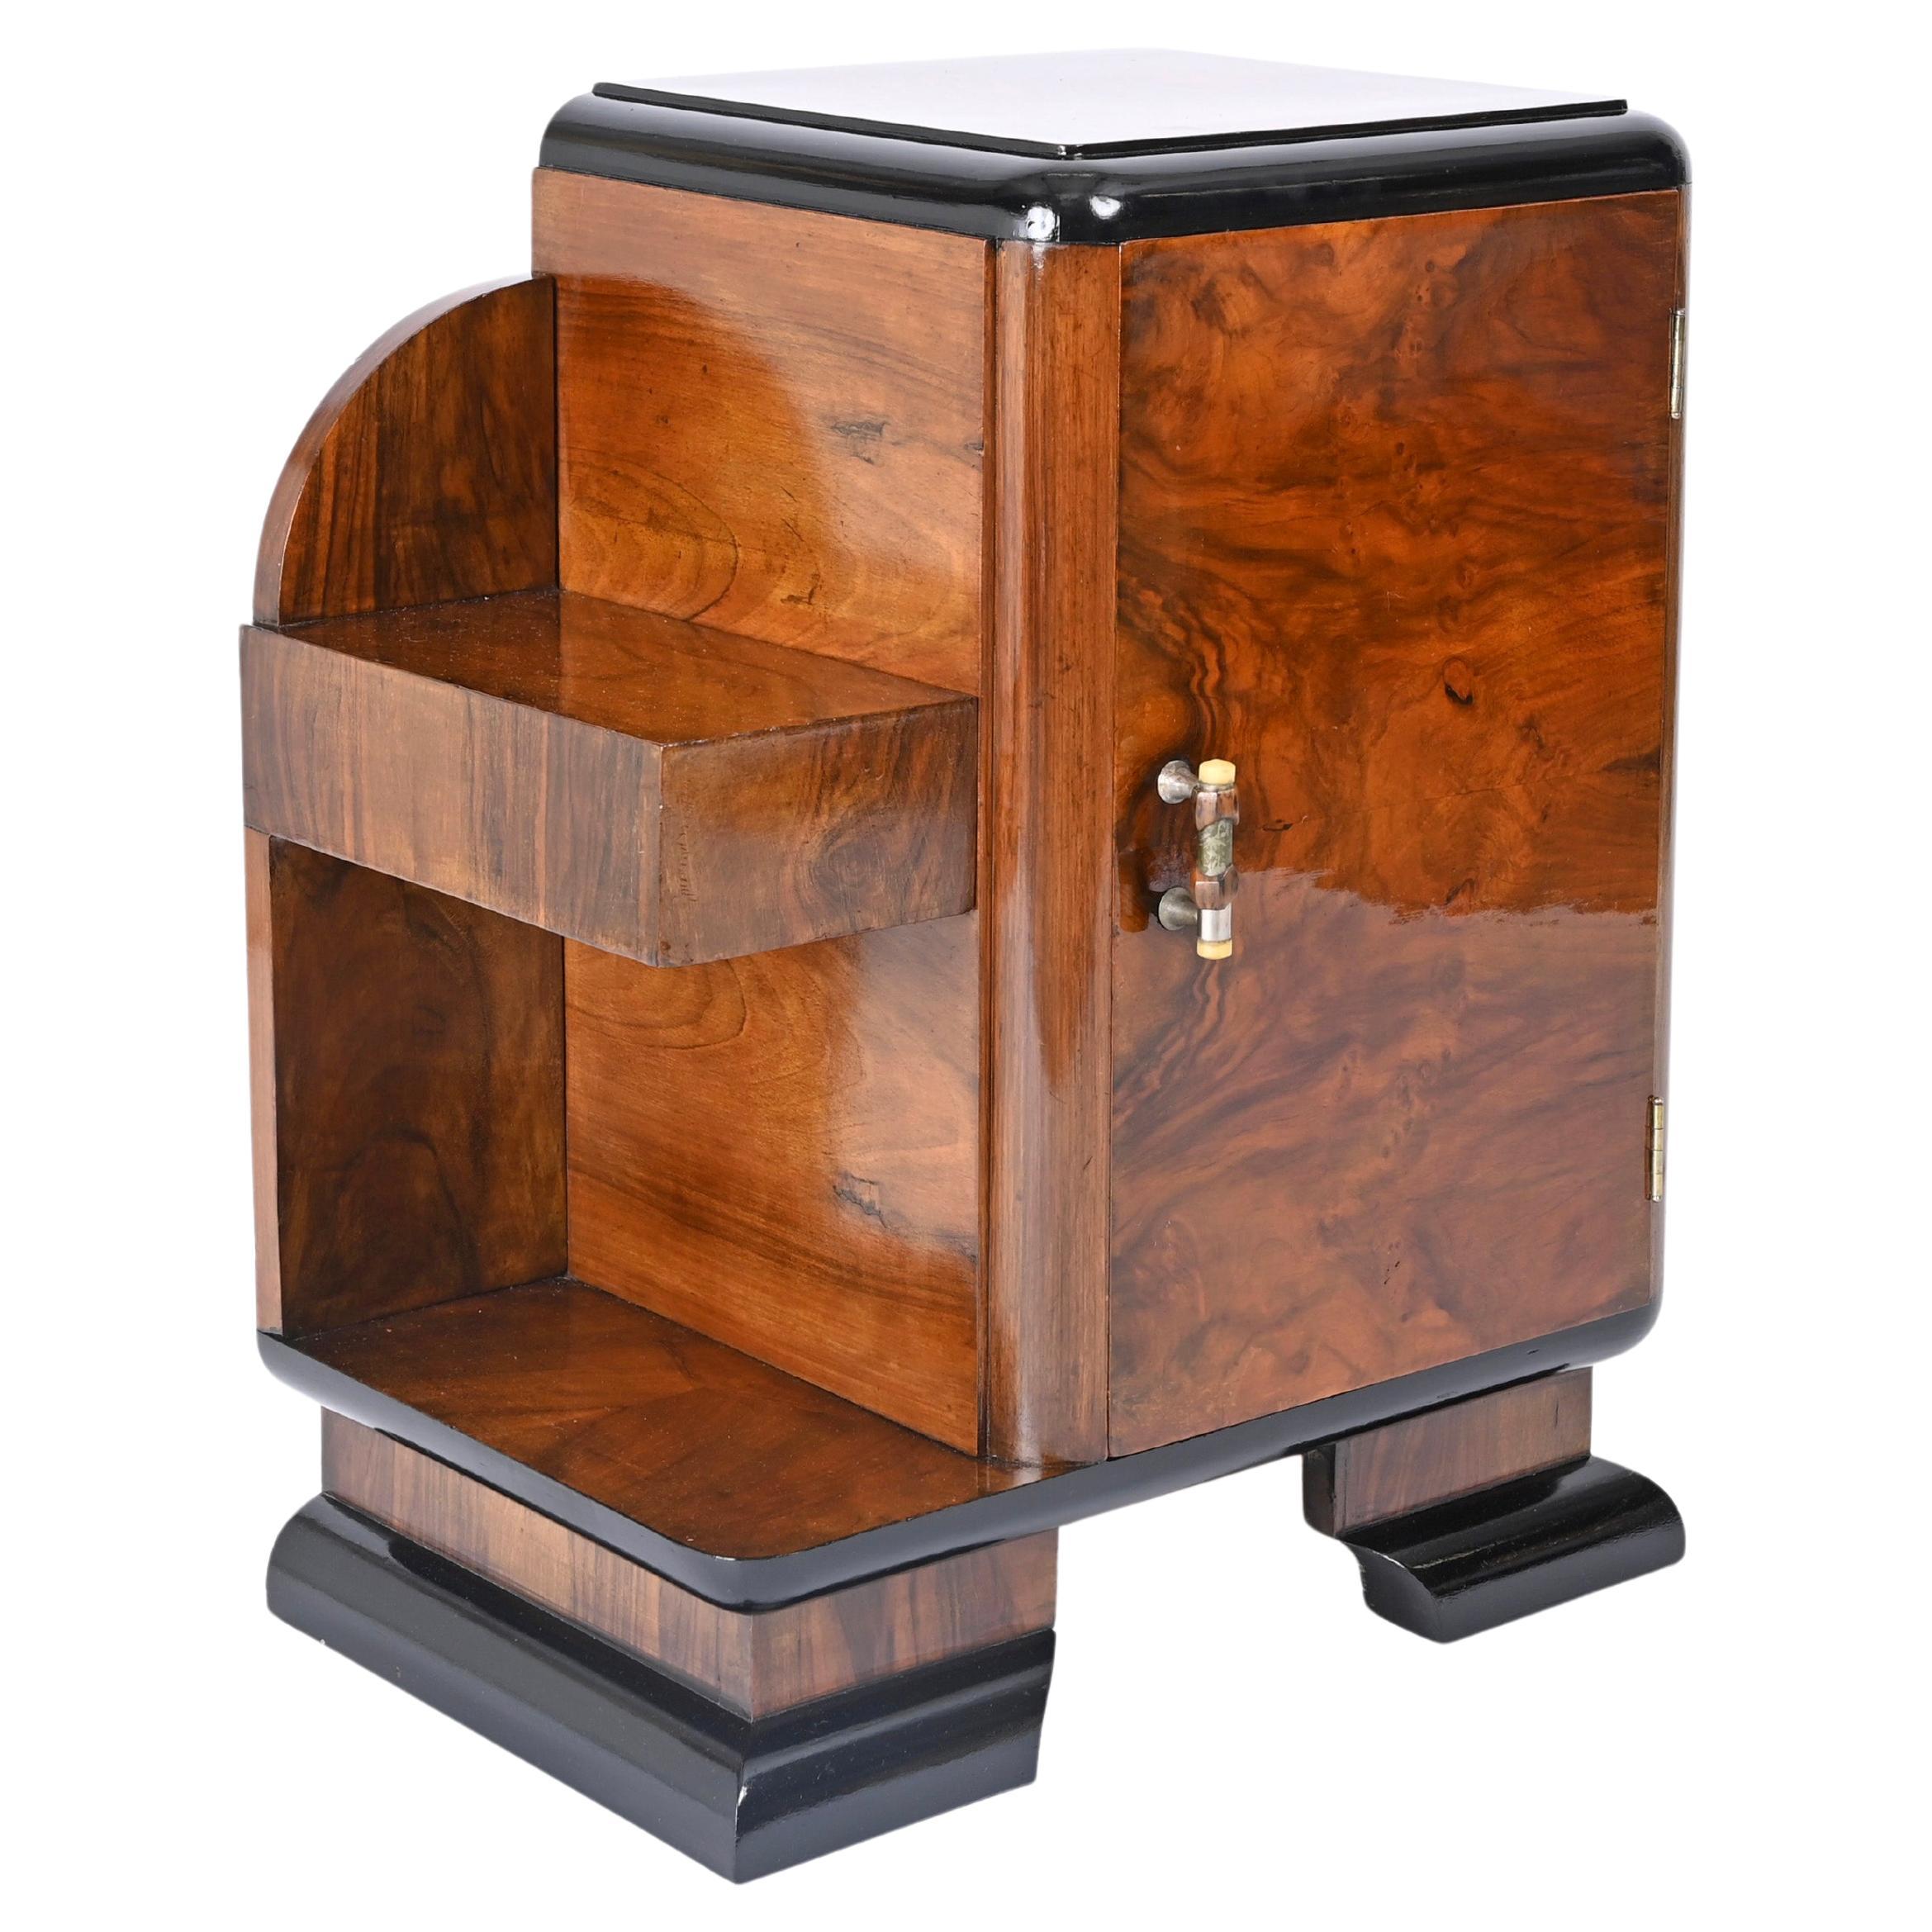 Art Deco Bedside Table, Olive Burl and Lacquered Wood, Italian Nightstand, 1930s